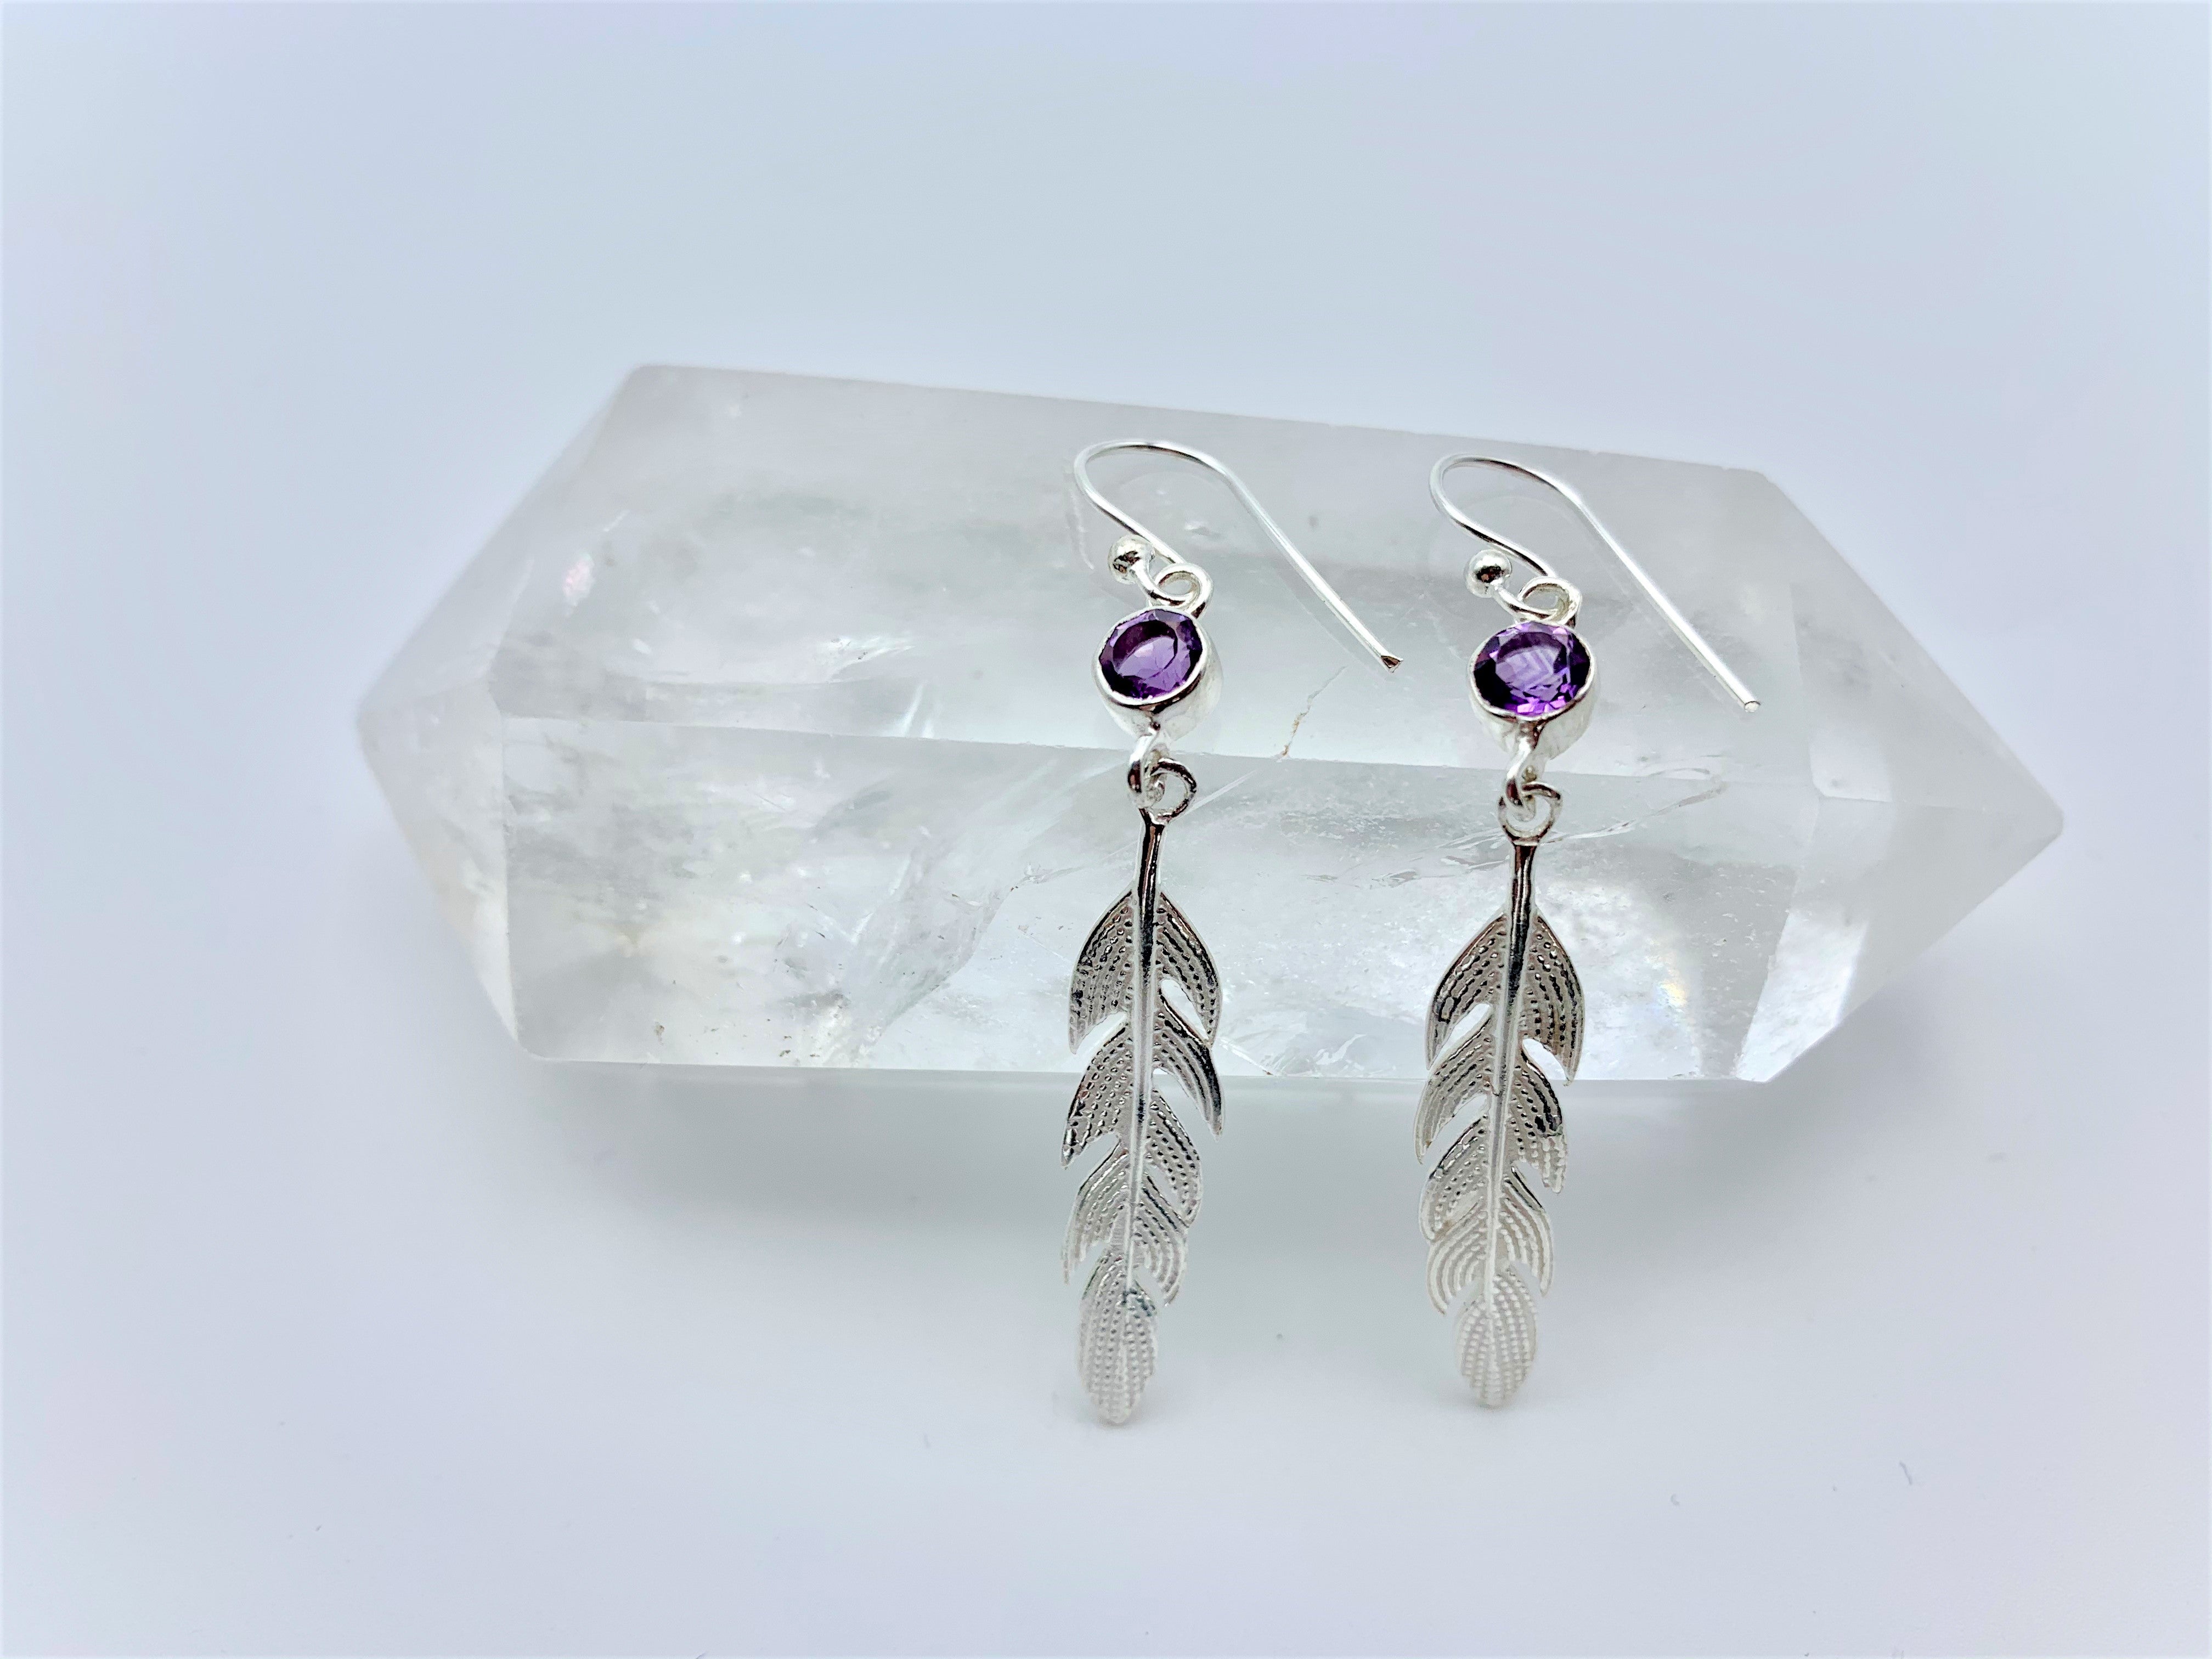 Round faceted amethyst gemstones are set in sterling silver (one in each earring) with long sterling feathers dangling below them. These have wires, not posts and are approximately 2" long.